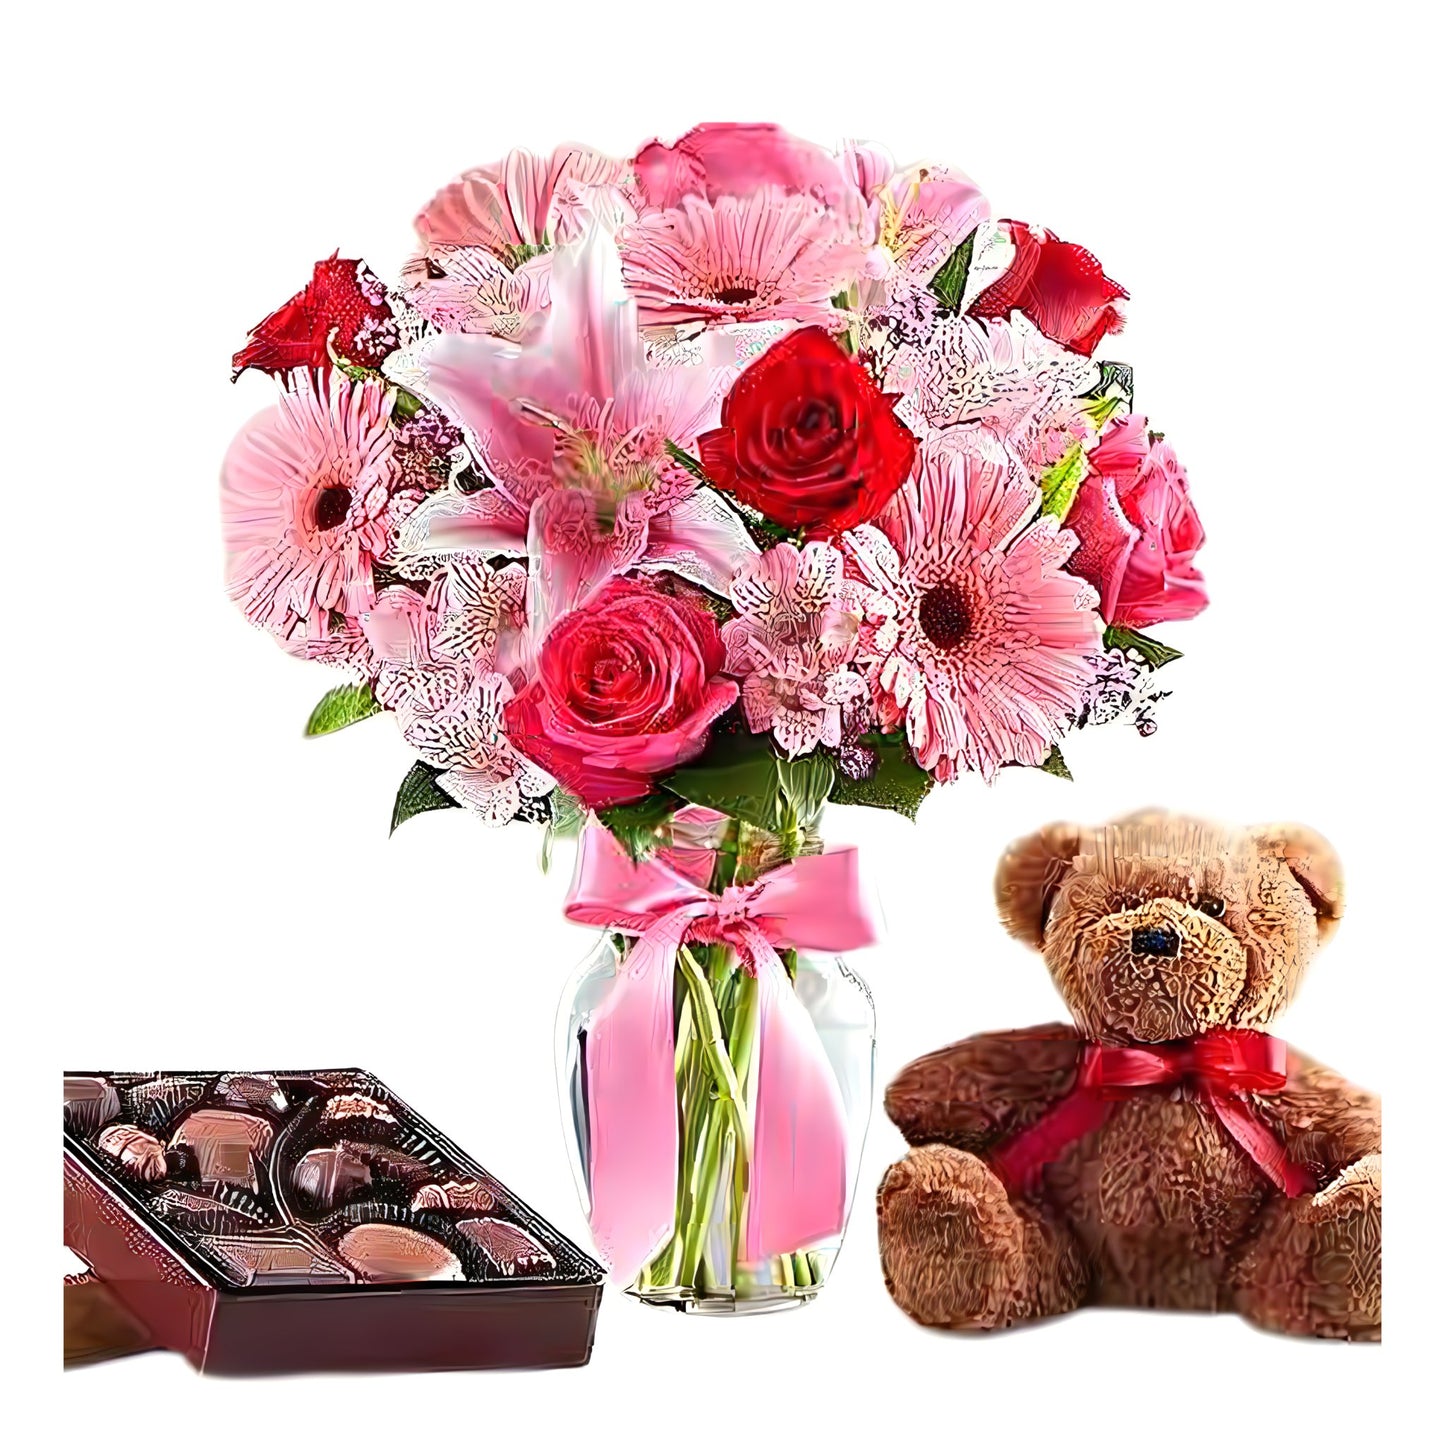 My Valentine's Love With Teddy Bear & Chocolates - Floral Arrangement - Flower Delivery Brooklyn